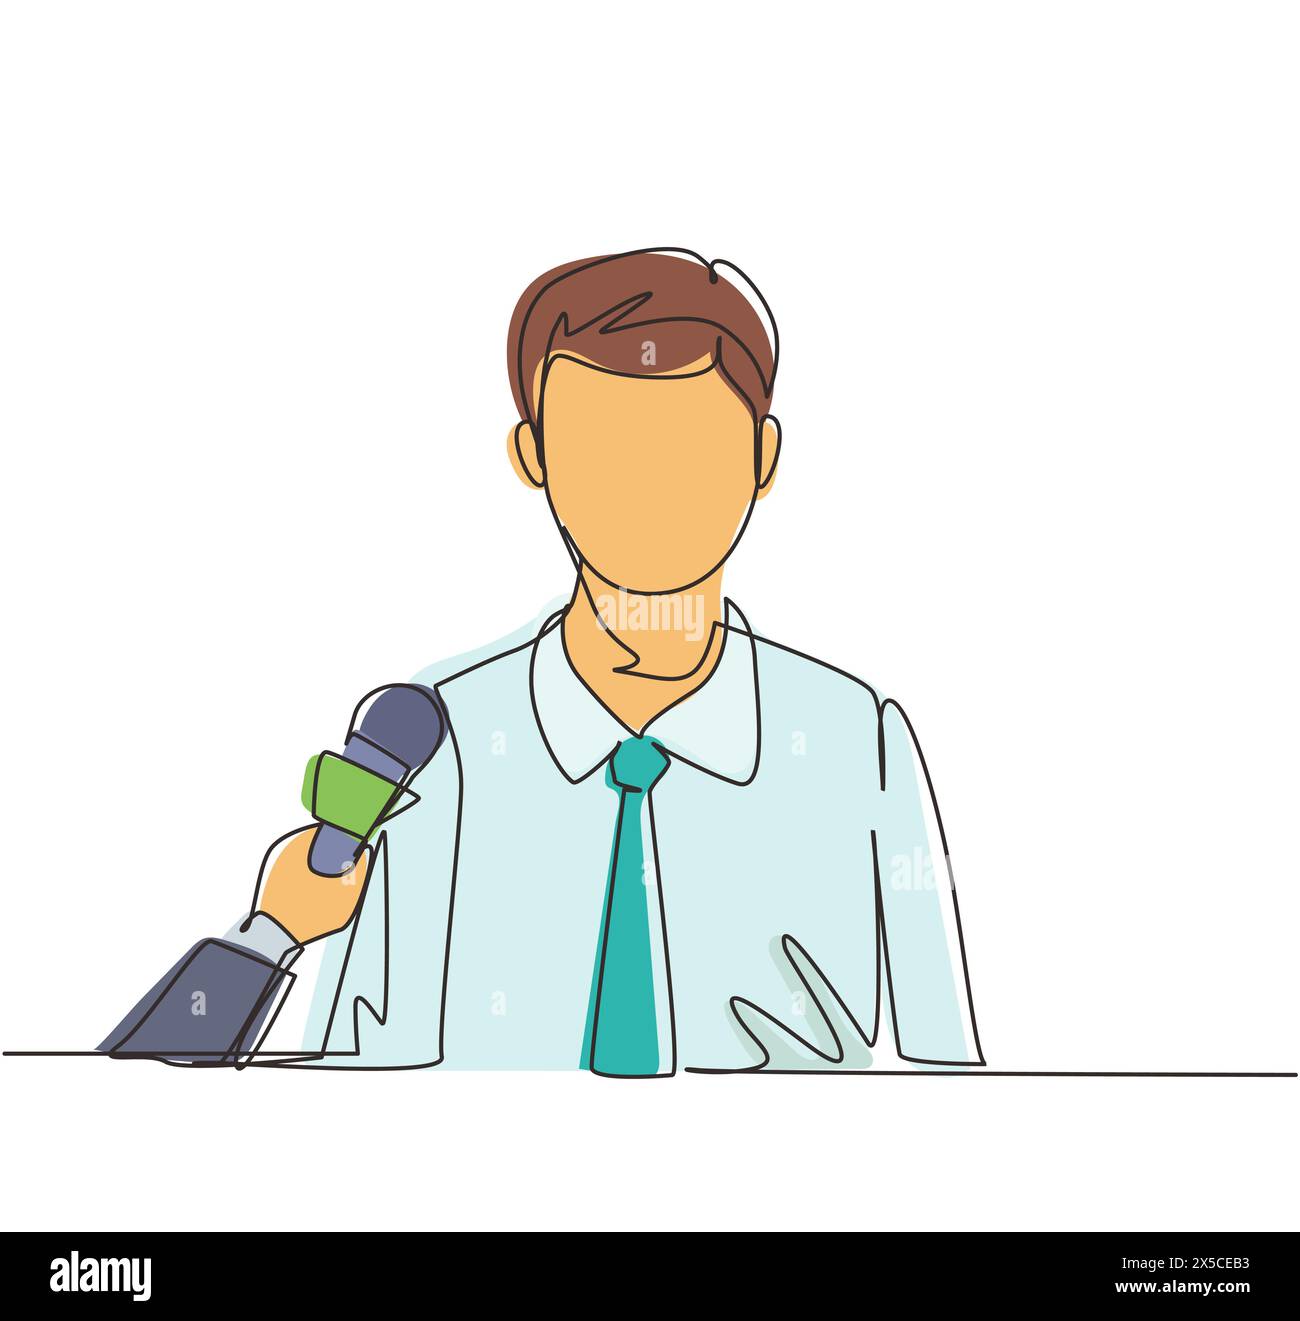 Single continuous line drawing businessman giving an interview in the presence of journalists with microphones. Man gives comments and opinions for br Stock Vector